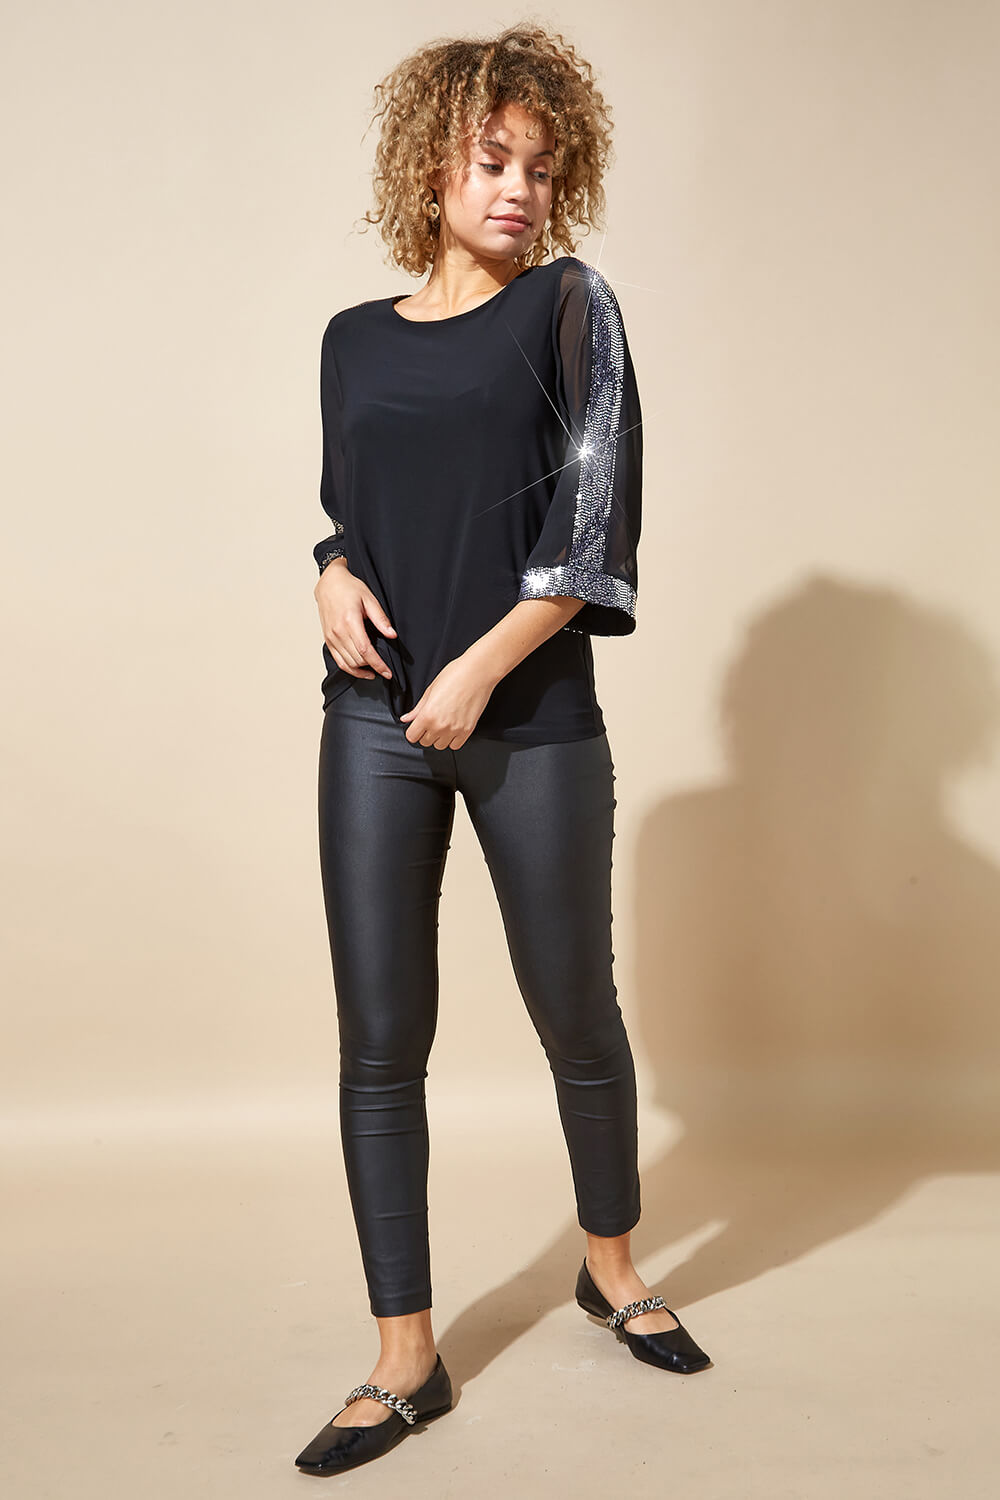 Black Contrast Sparkle Sleeve Top, Image 2 of 4